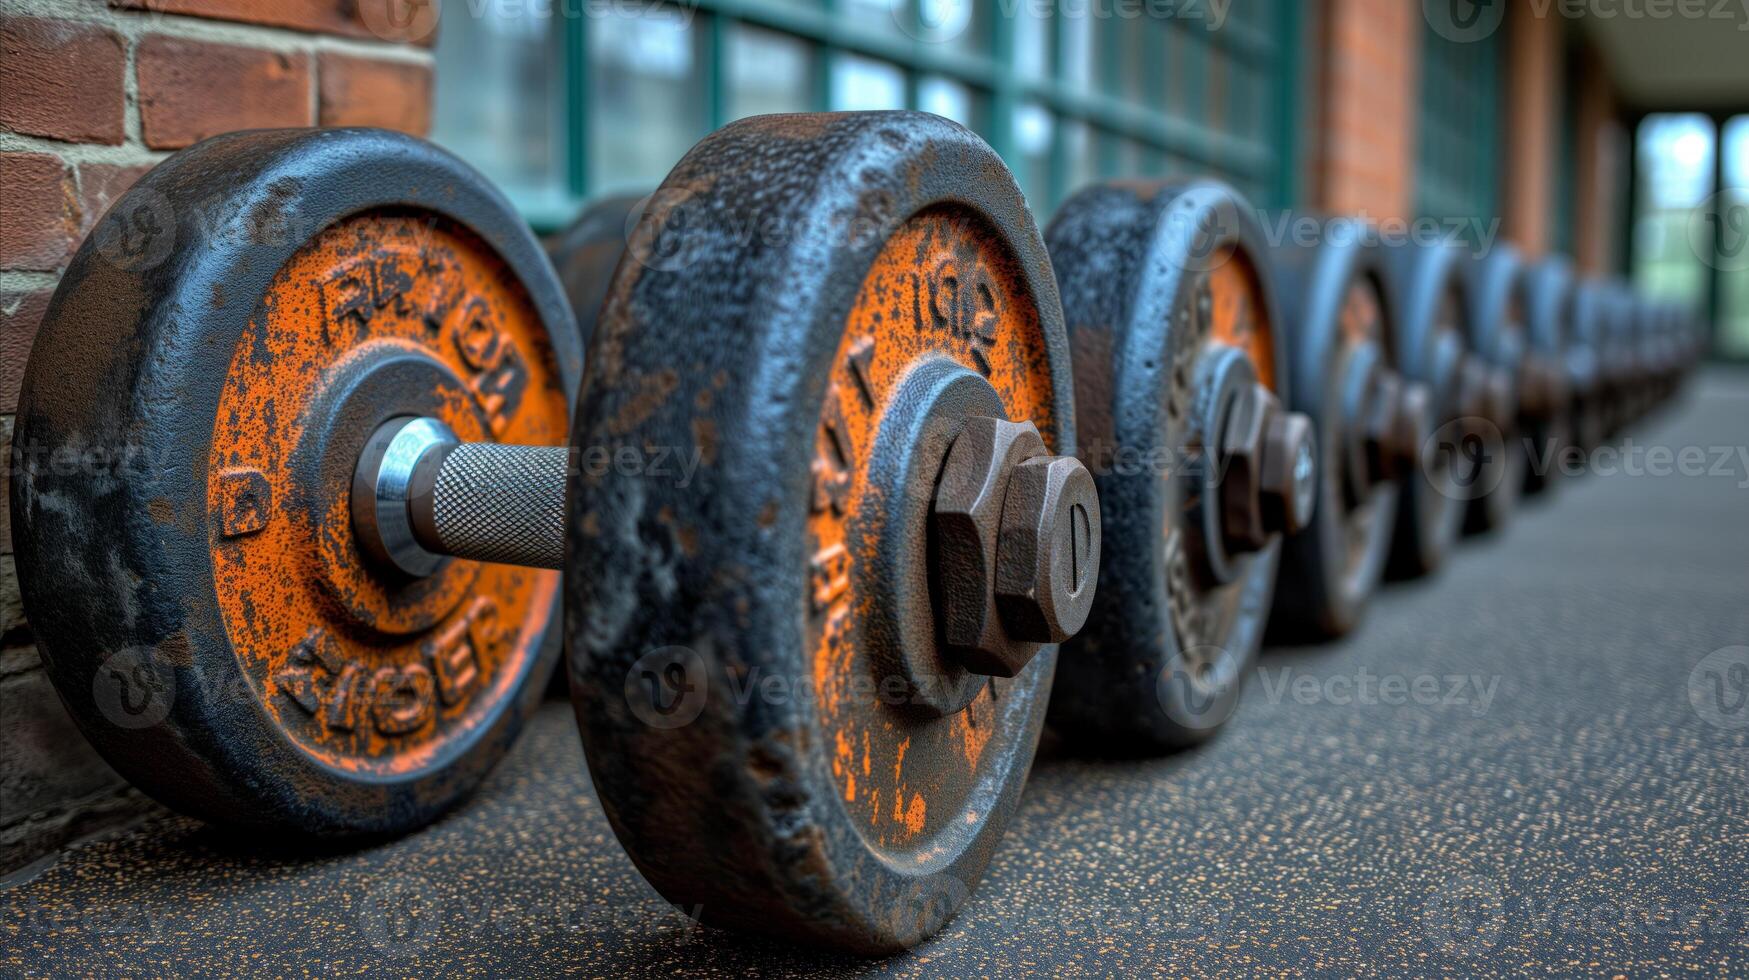 AI generated Row of rusty dumbbells on gym floor - fitness equipment close-up photo